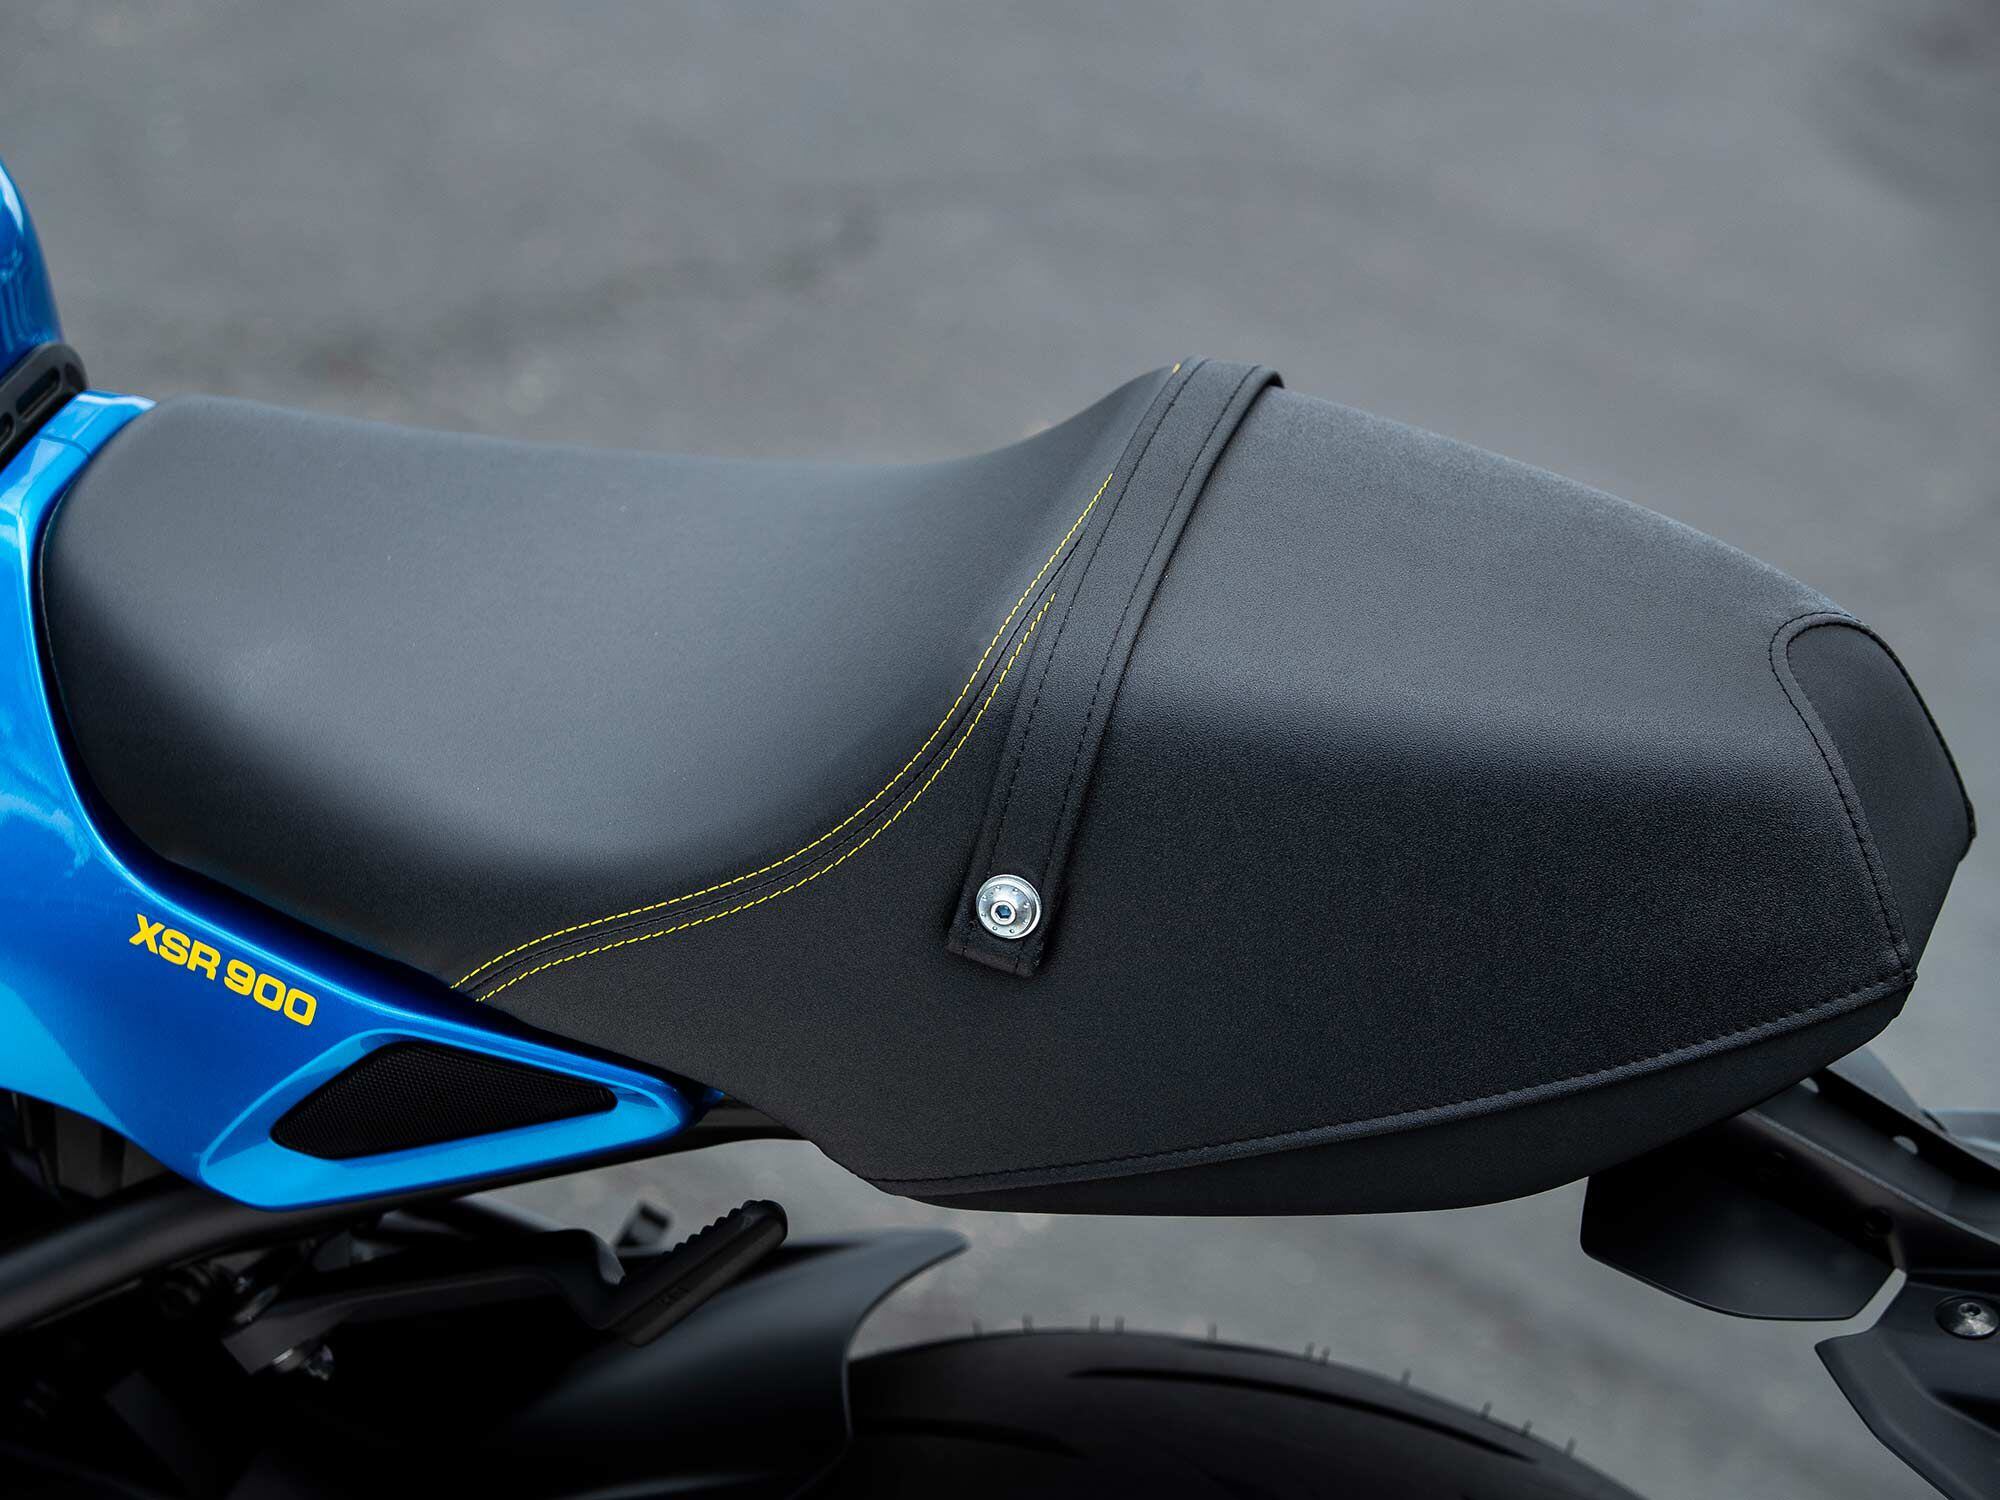 While it looks great, the seat can become uncomfortable on long rides.